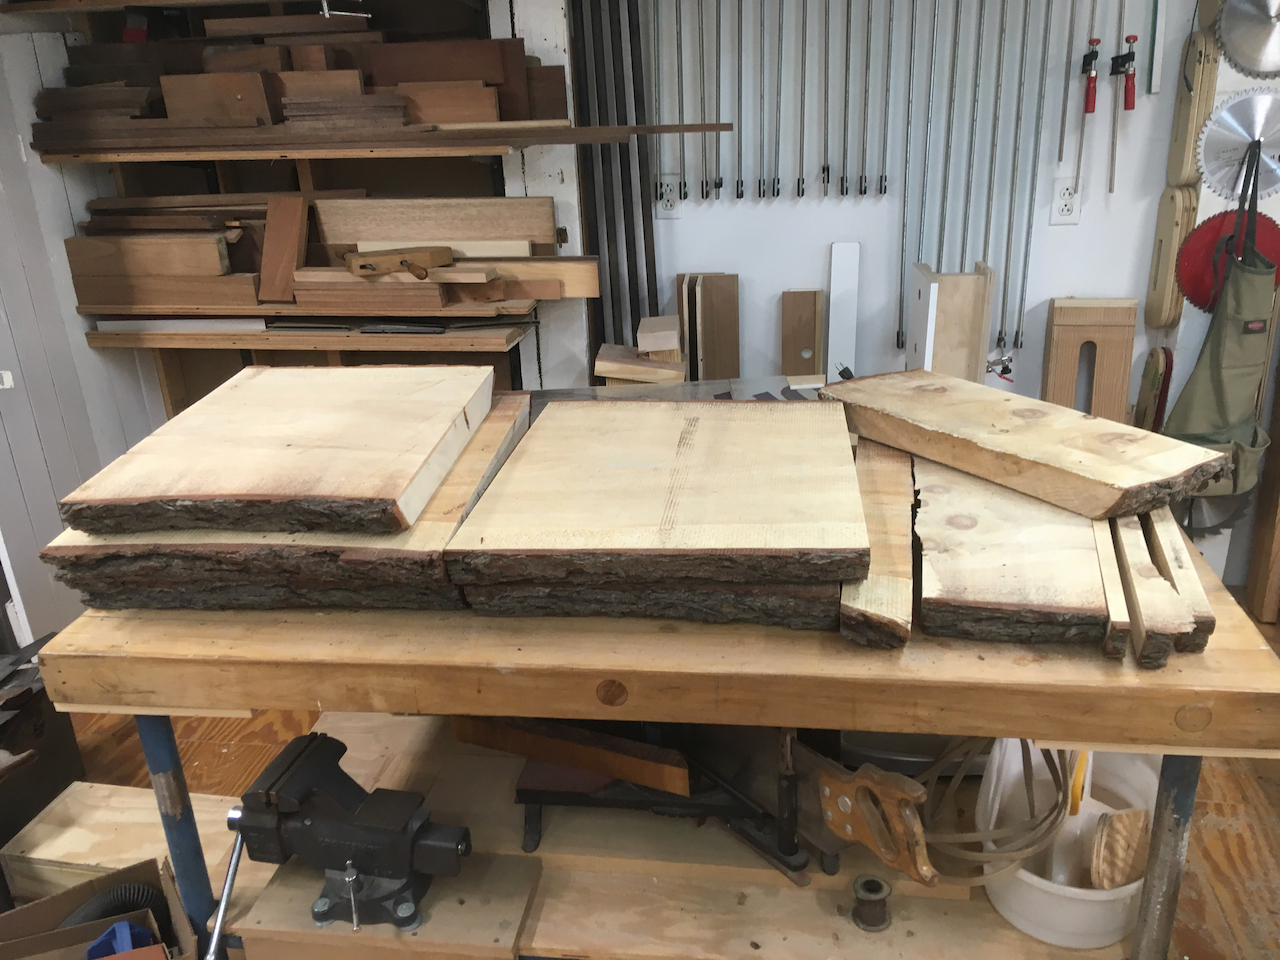 Five sections for possible chair seat blanks, with offcuts